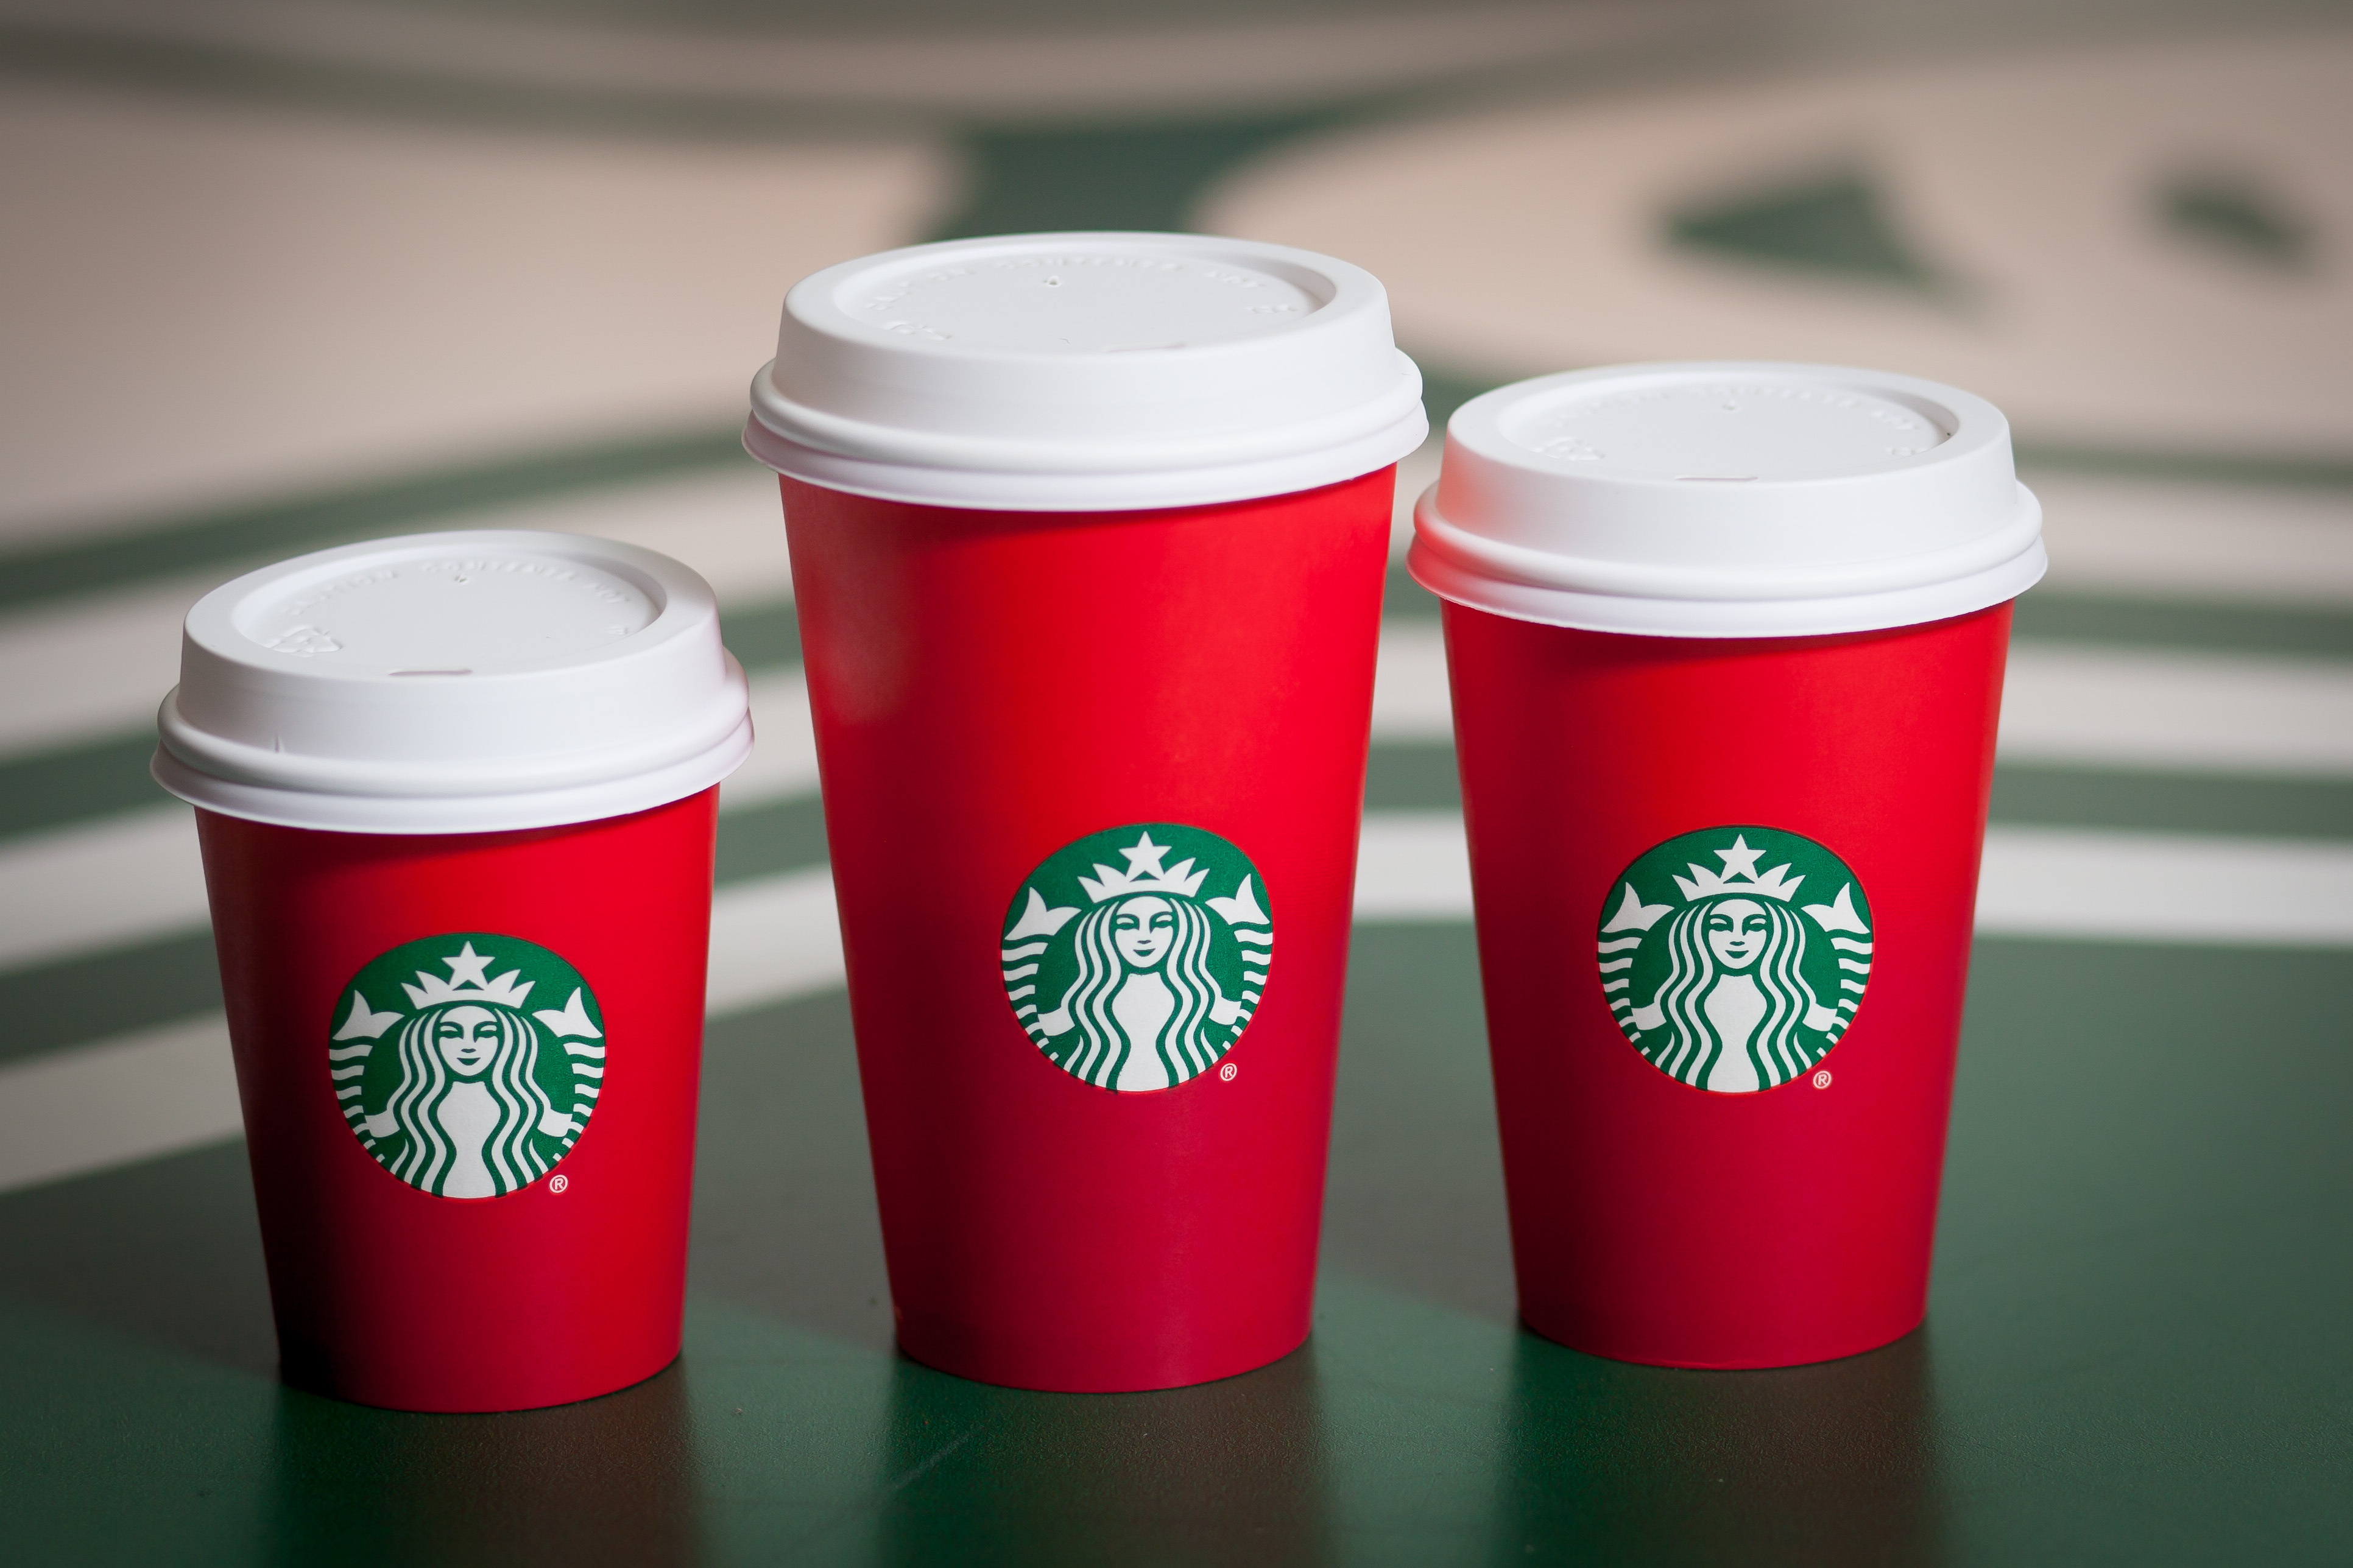 Starbucks Red Cups Cause Controversy 6125